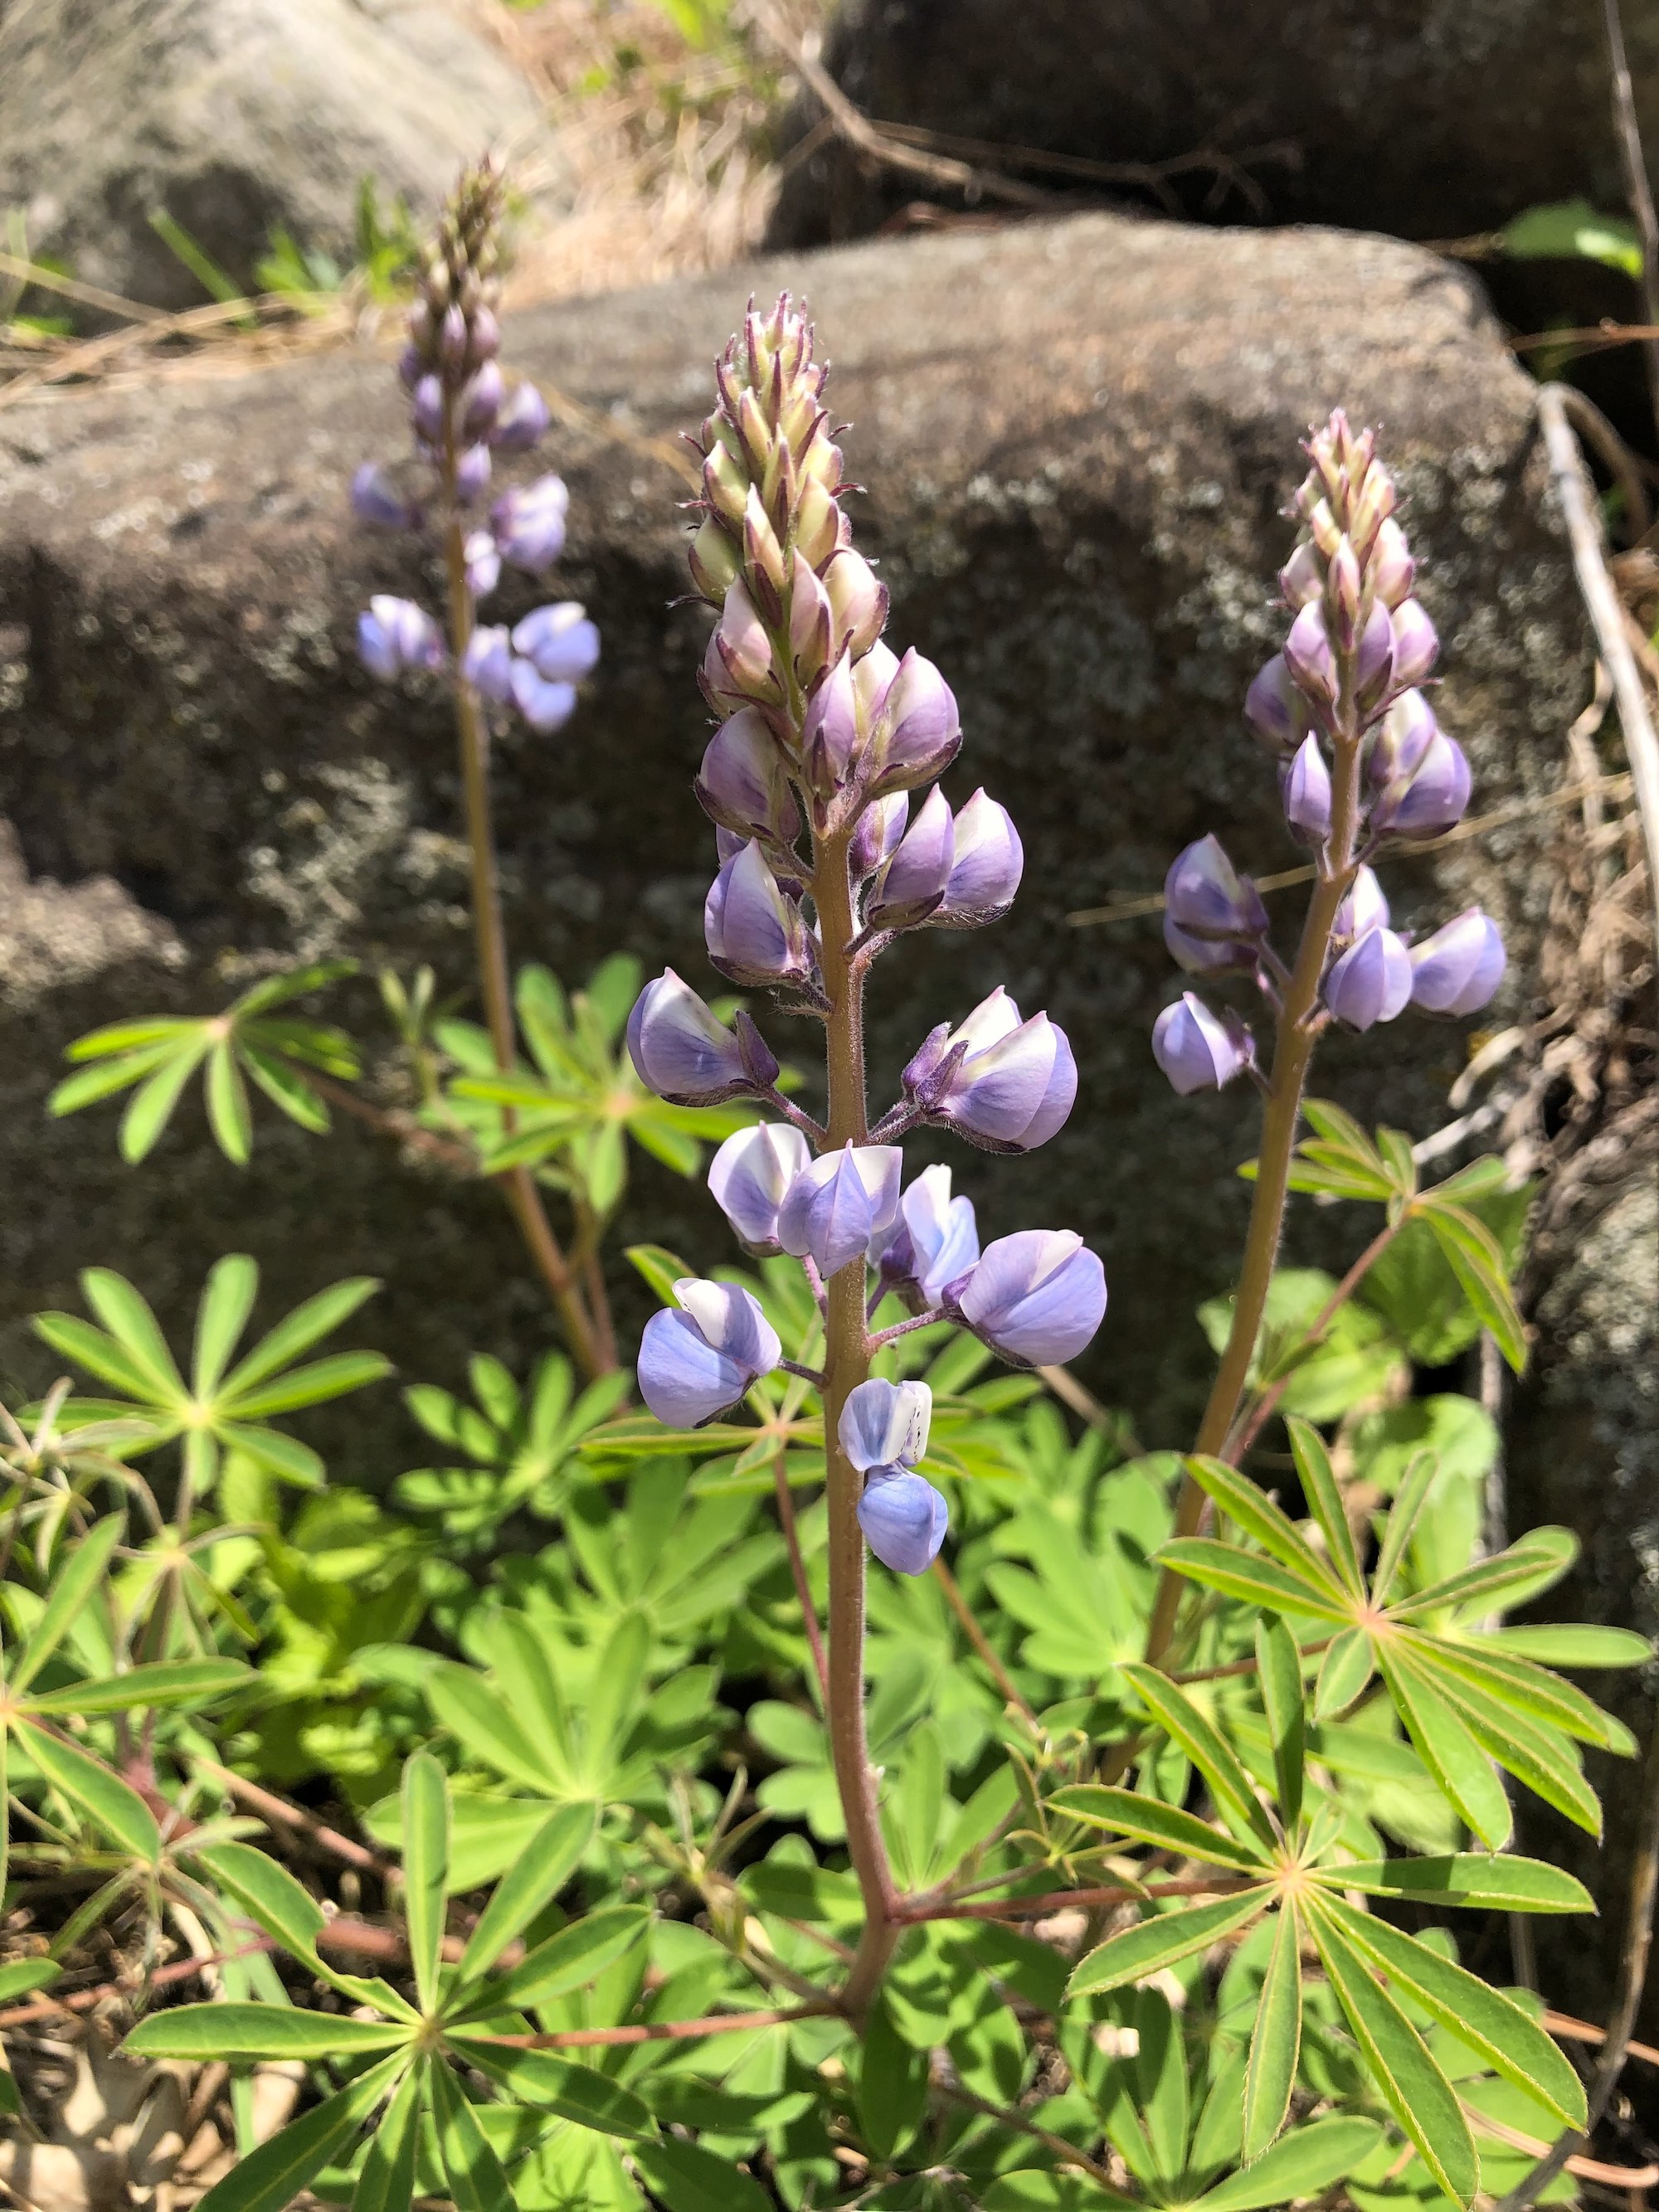 Wild Lupine next to the UW-Madison Arboretum Visitor Center in Madison, Wisconsin on May 13, 2021.